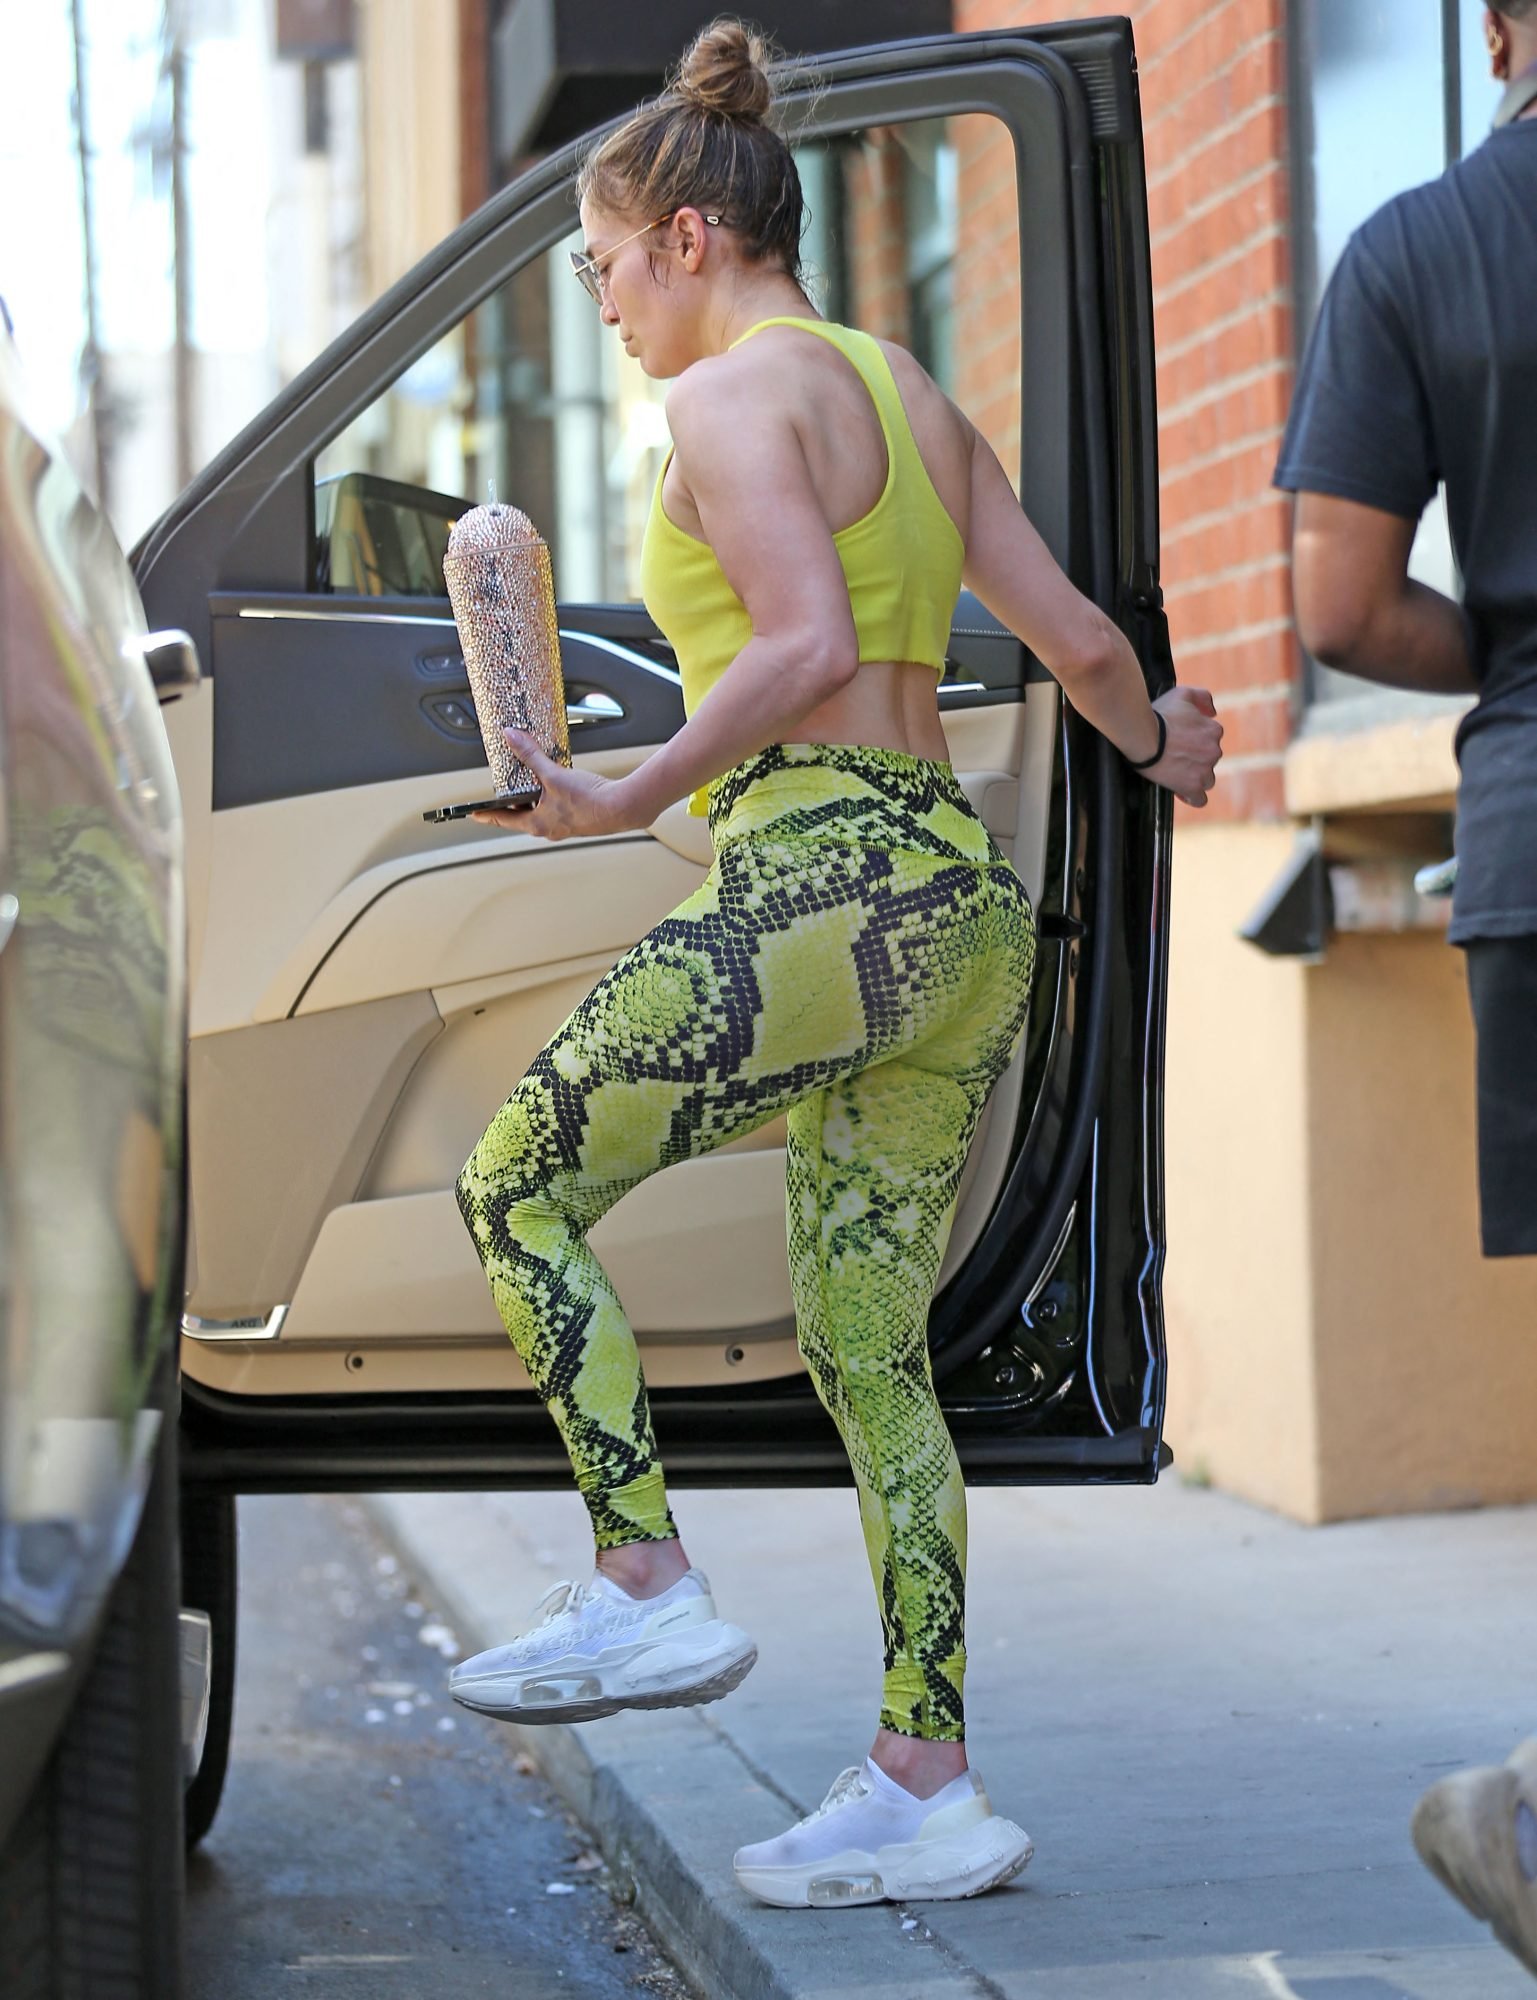 After her sweat session, she was seen exiting the premises as paps waited for her to get into a waiting SUV.